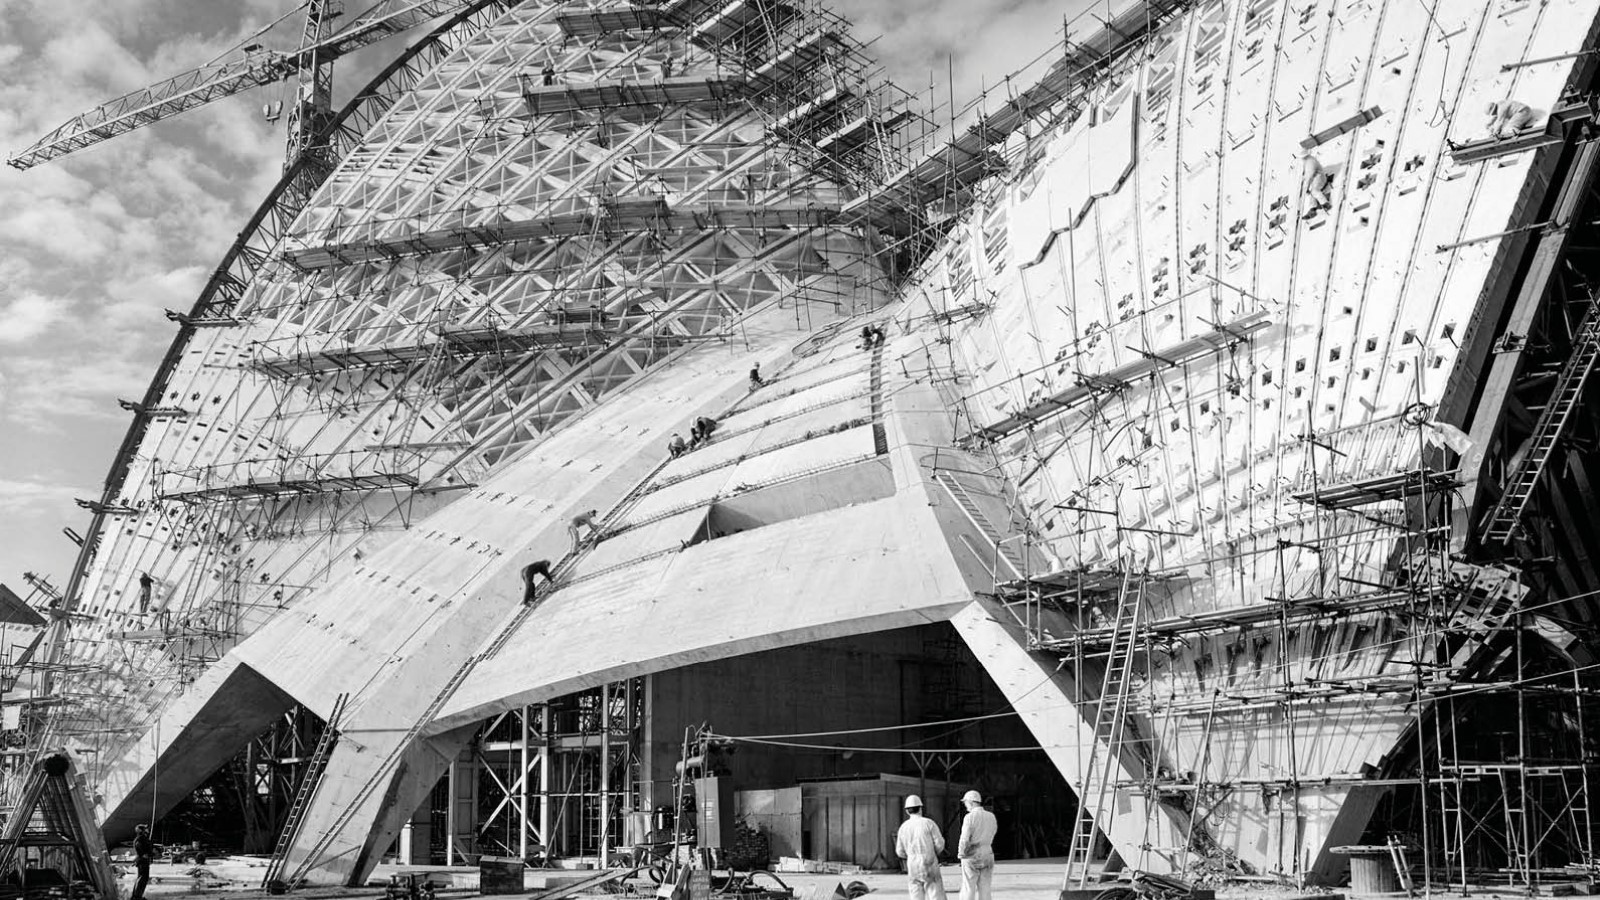 The sails of the Opera house under construction.